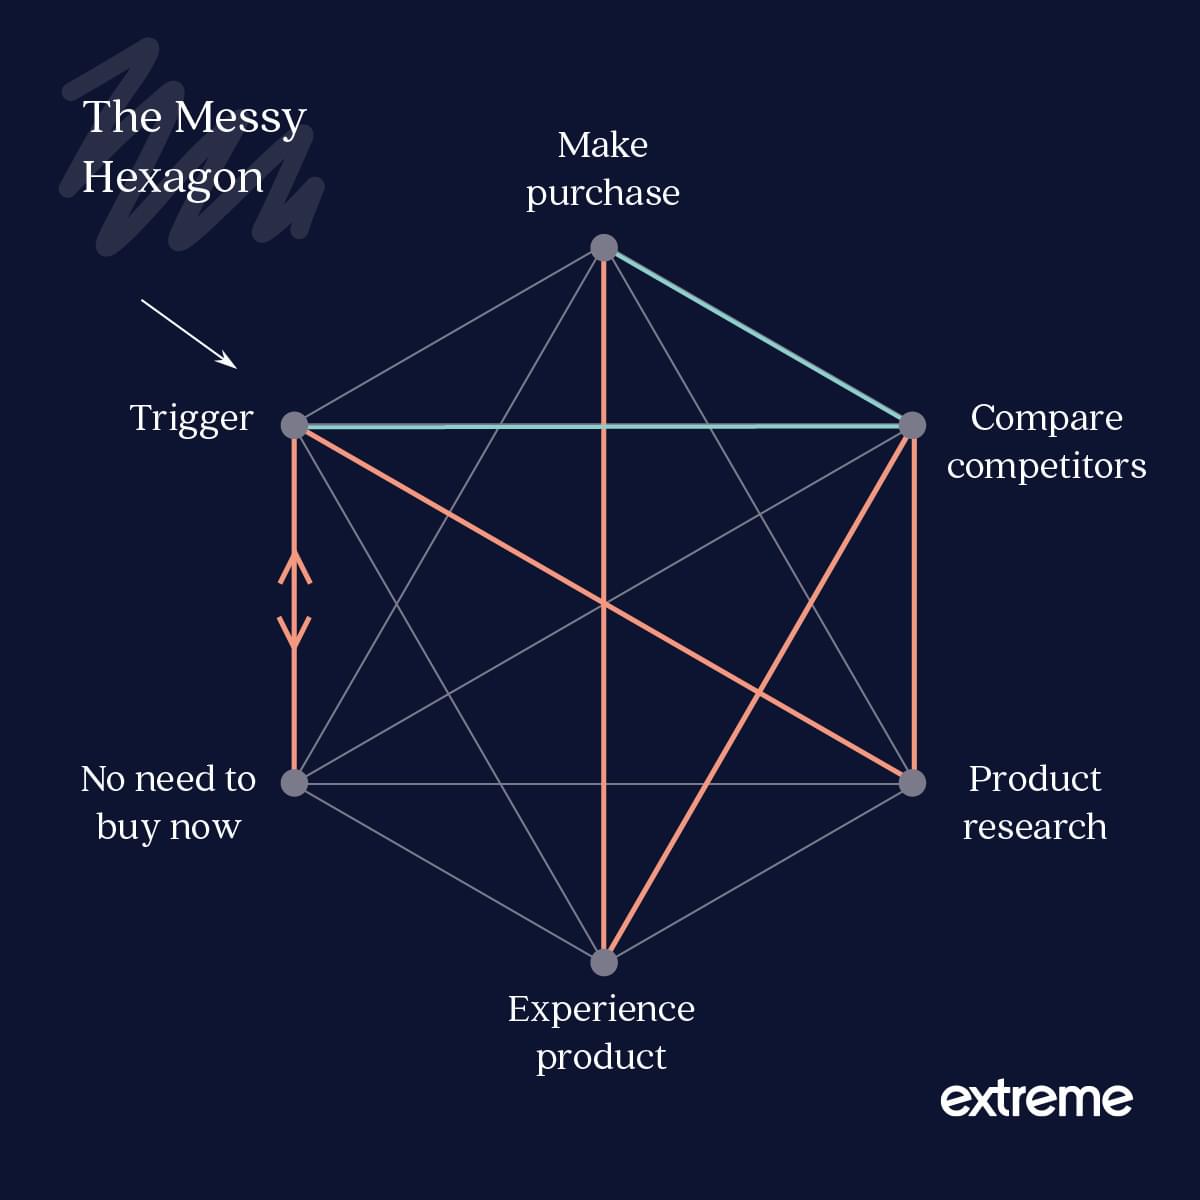 The Messy Hexagon, inspired by the Hankins Hexagon and The Messy Middle.